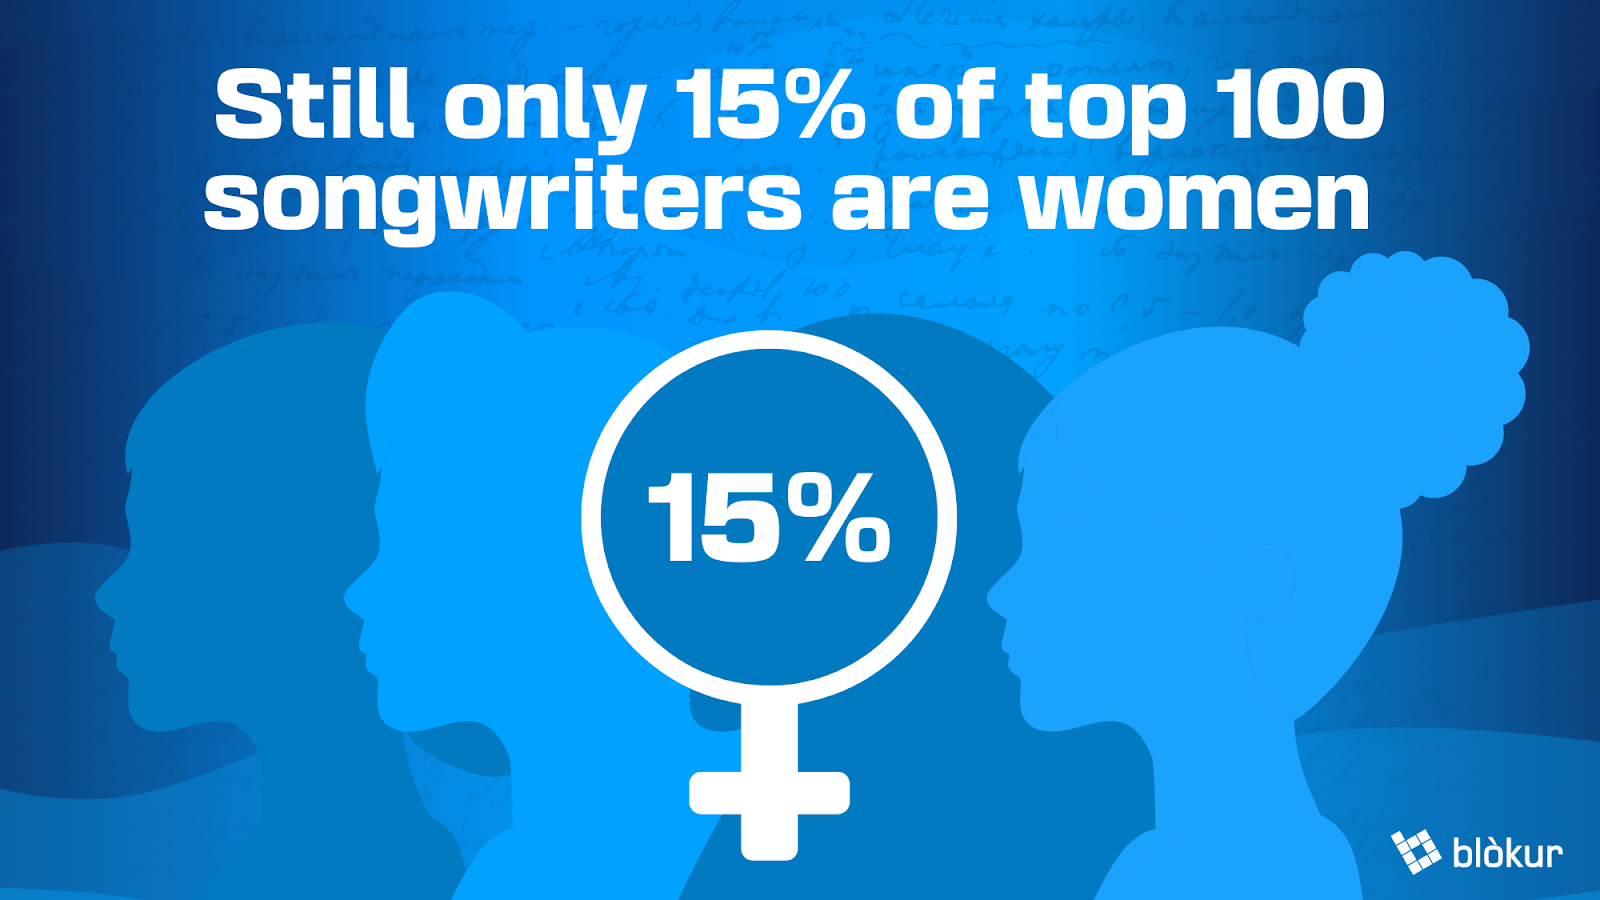 In 2022, just 15% of the top 100 songwriters were women